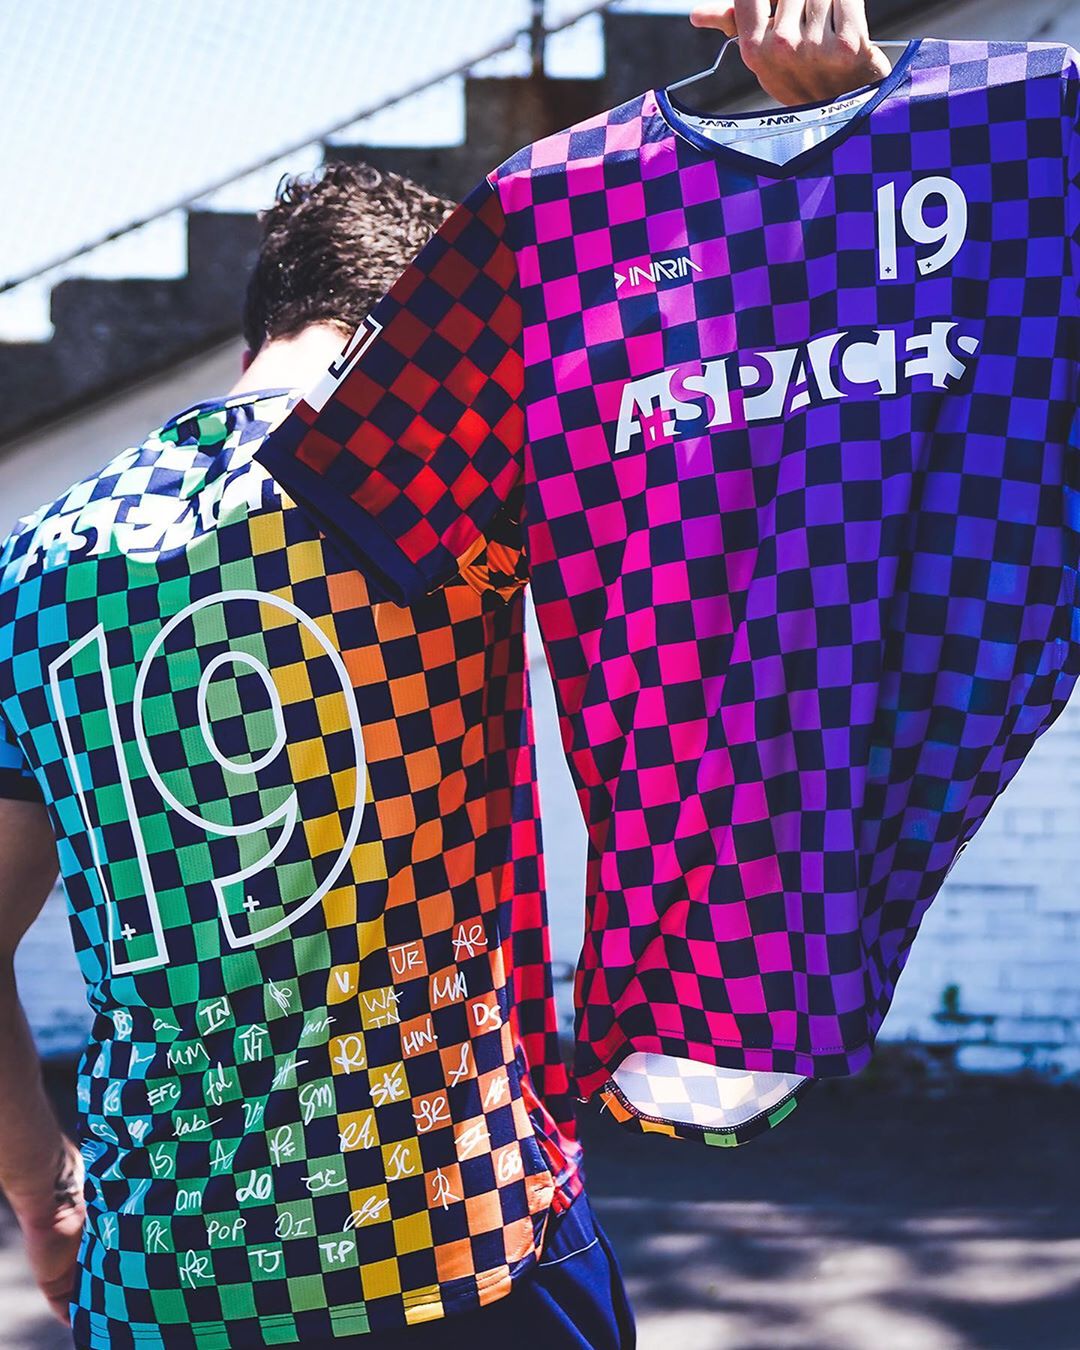 A+ Spaces [Across Spaces] for Pride ‘19 with 1of1 detail. Signature scribbles from within our community were sent in from across the globe to show some love. 
Pick one up (w/o the signatures 😬) at the link in the bio // We’re donating profits to @the519 #pride #inariasoccer #pridetoronto